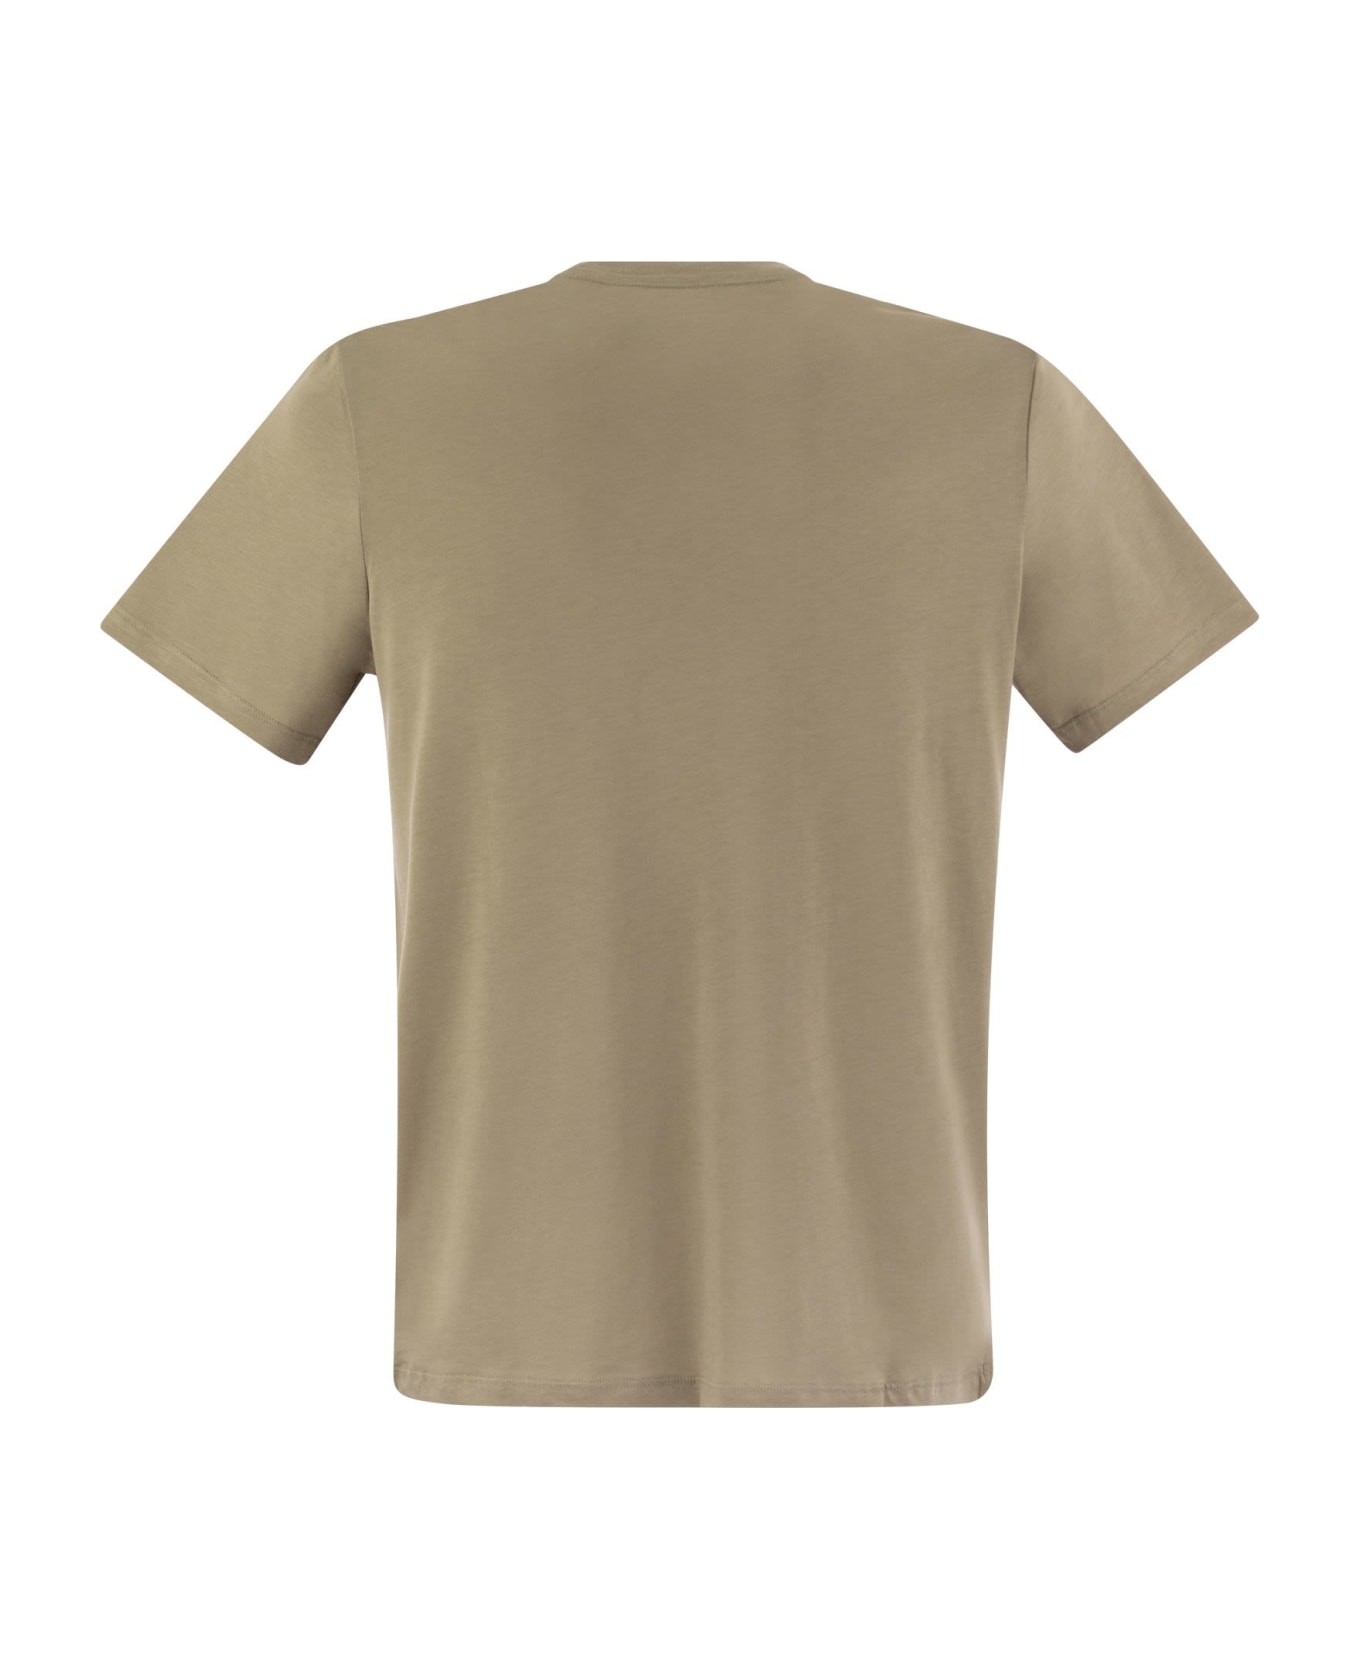 Majestic Filatures Short-sleeved T-shirt In Lyocell And Cotton - Sand シャツ